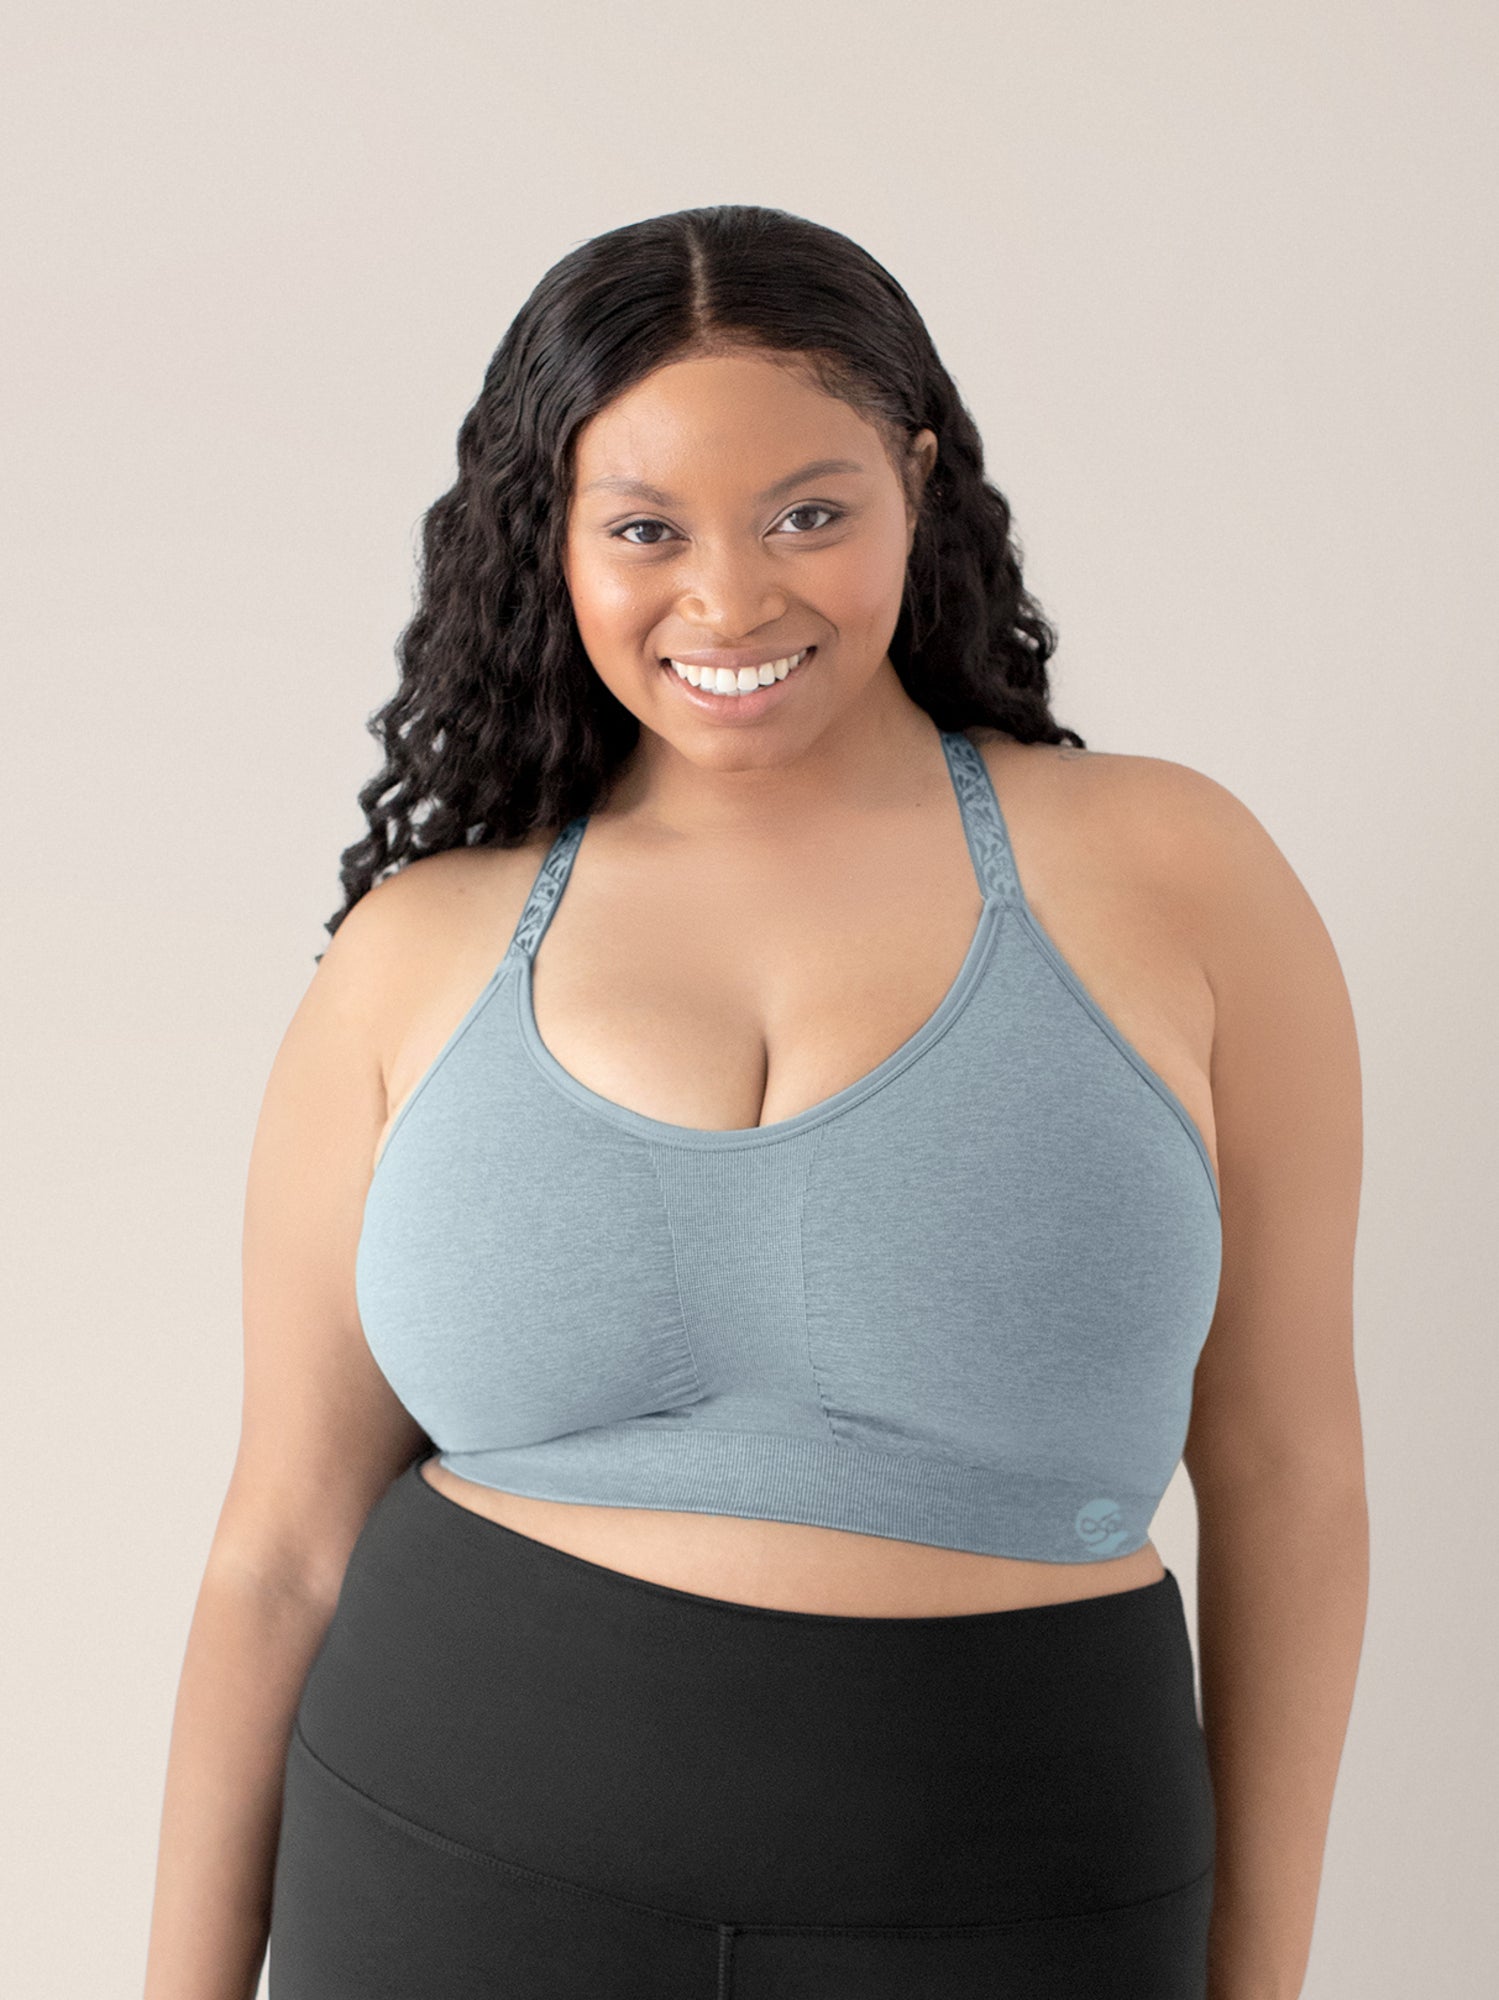 Your favorite bra just got a major upgrade! The new and improved